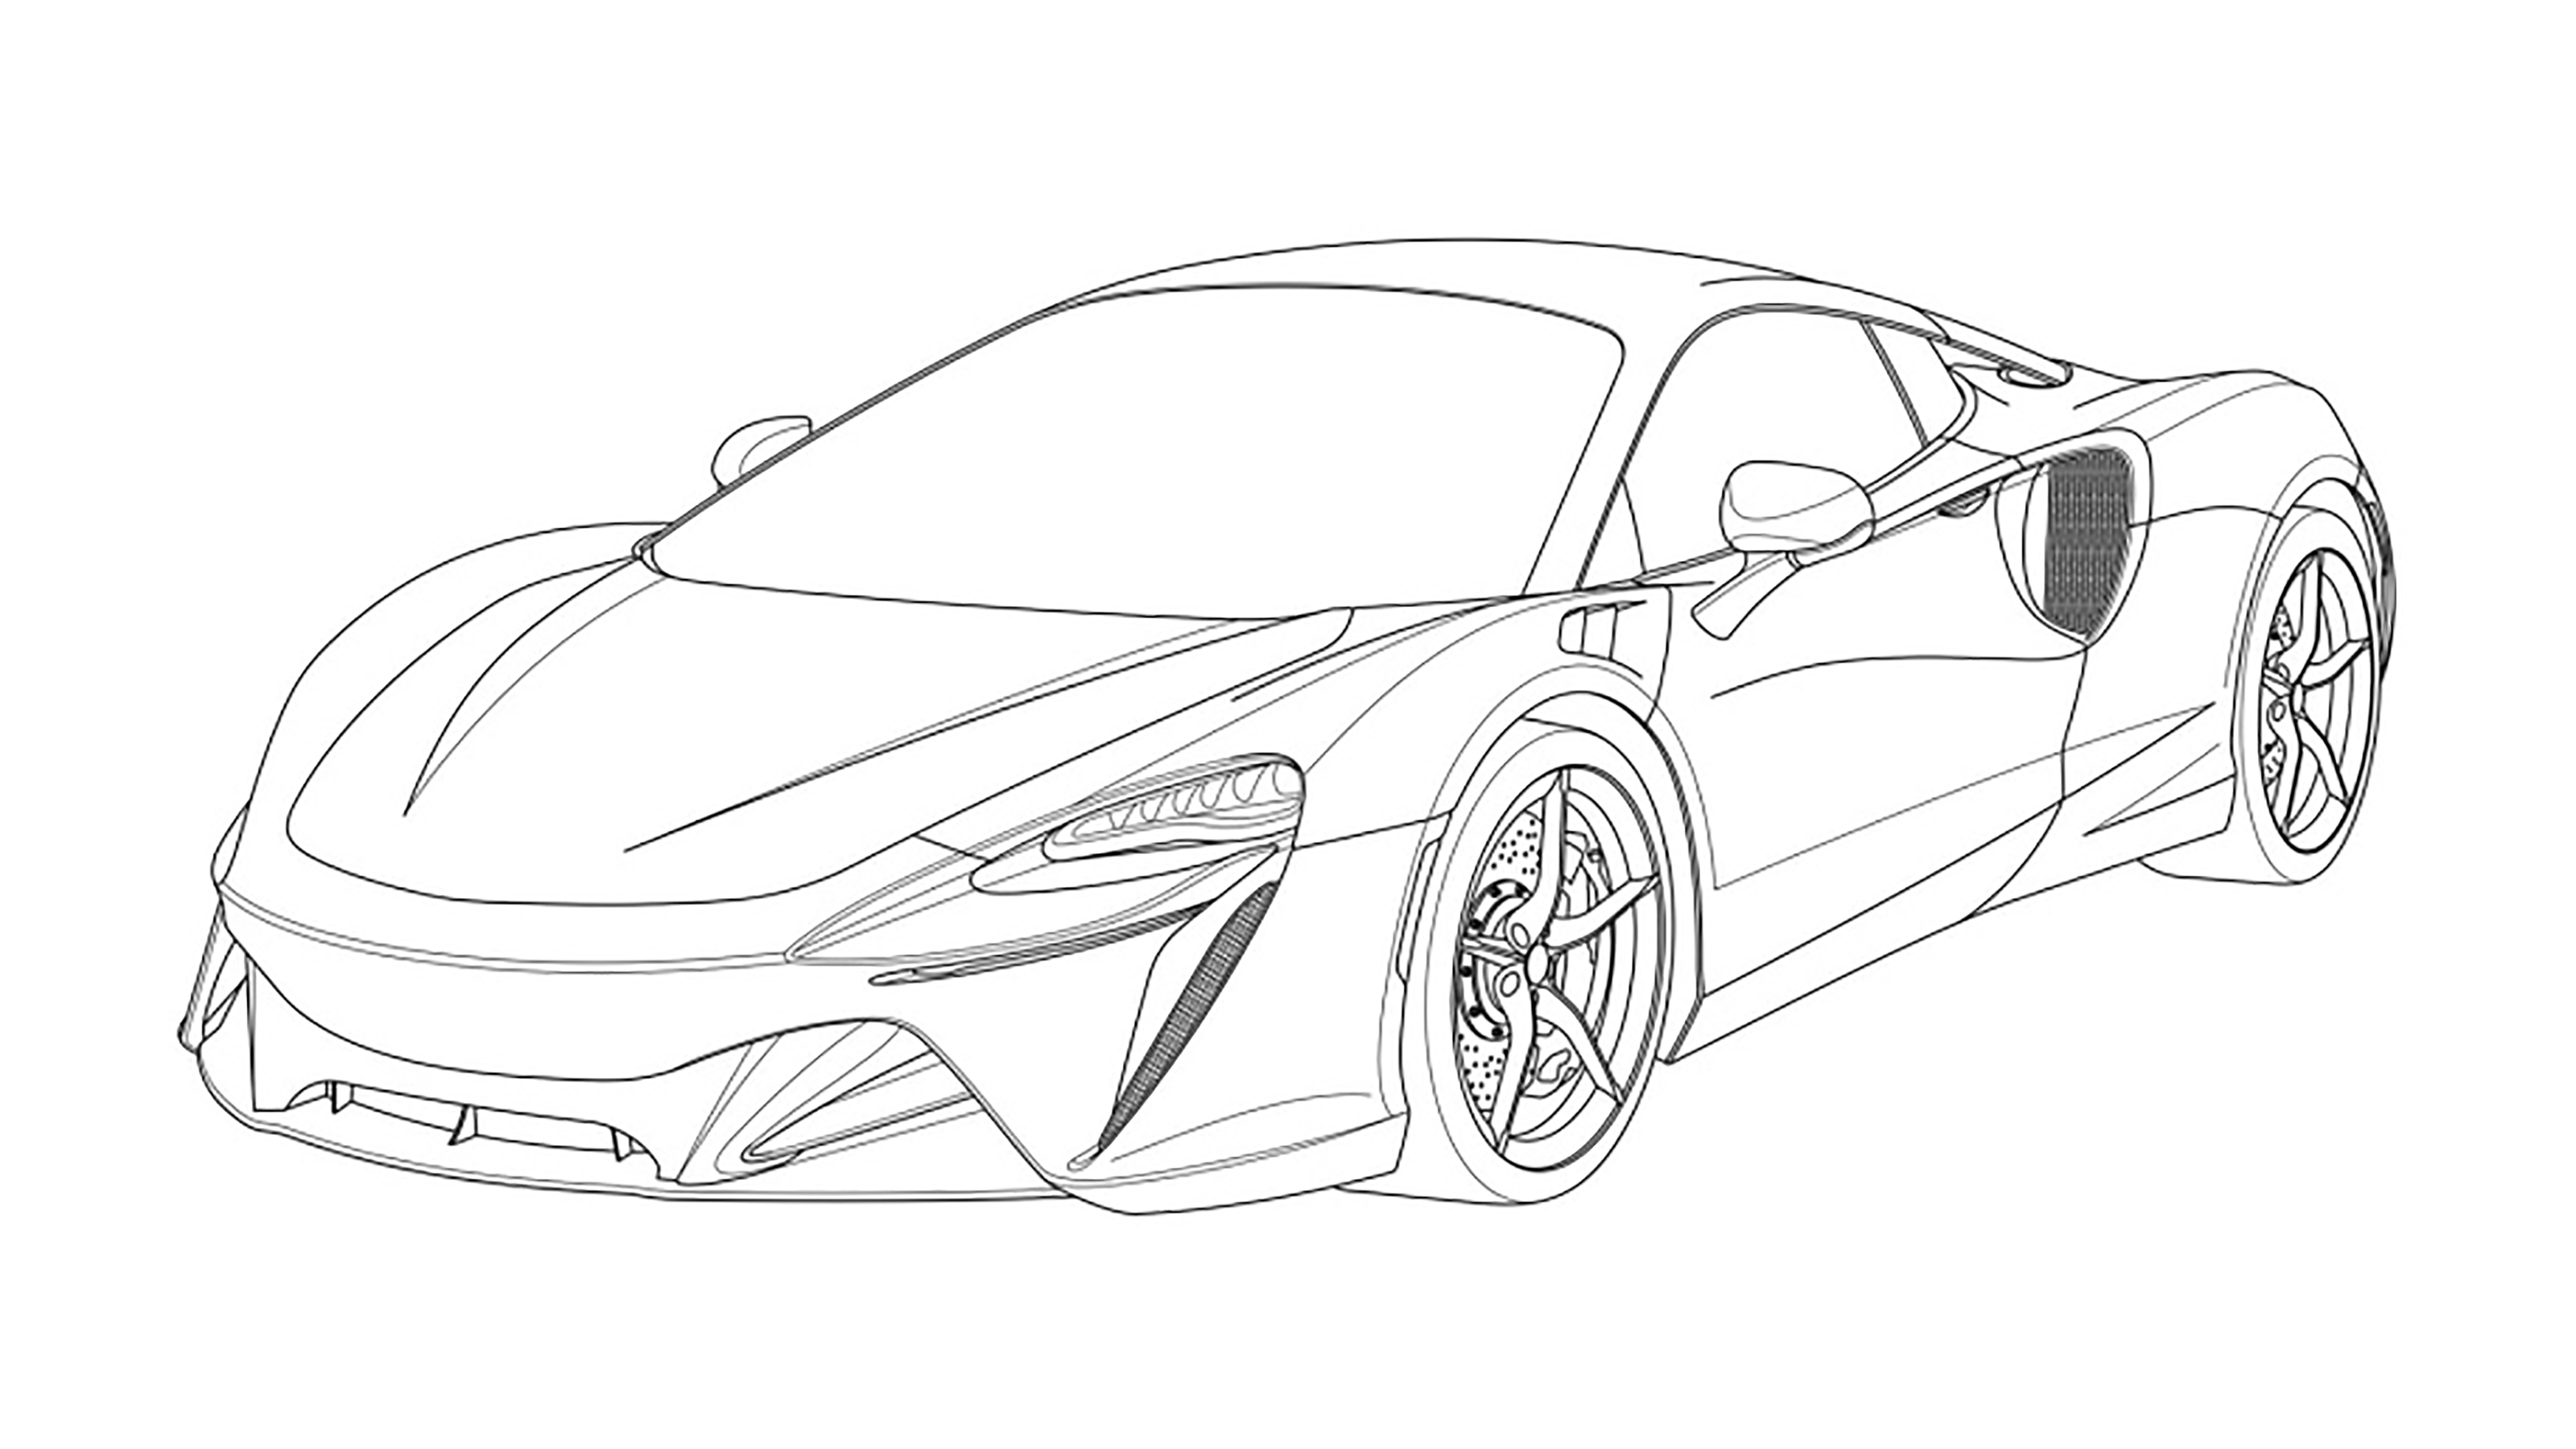 New McLaren V6 hybrid supercar unveiled in patent drawings | Auto Express